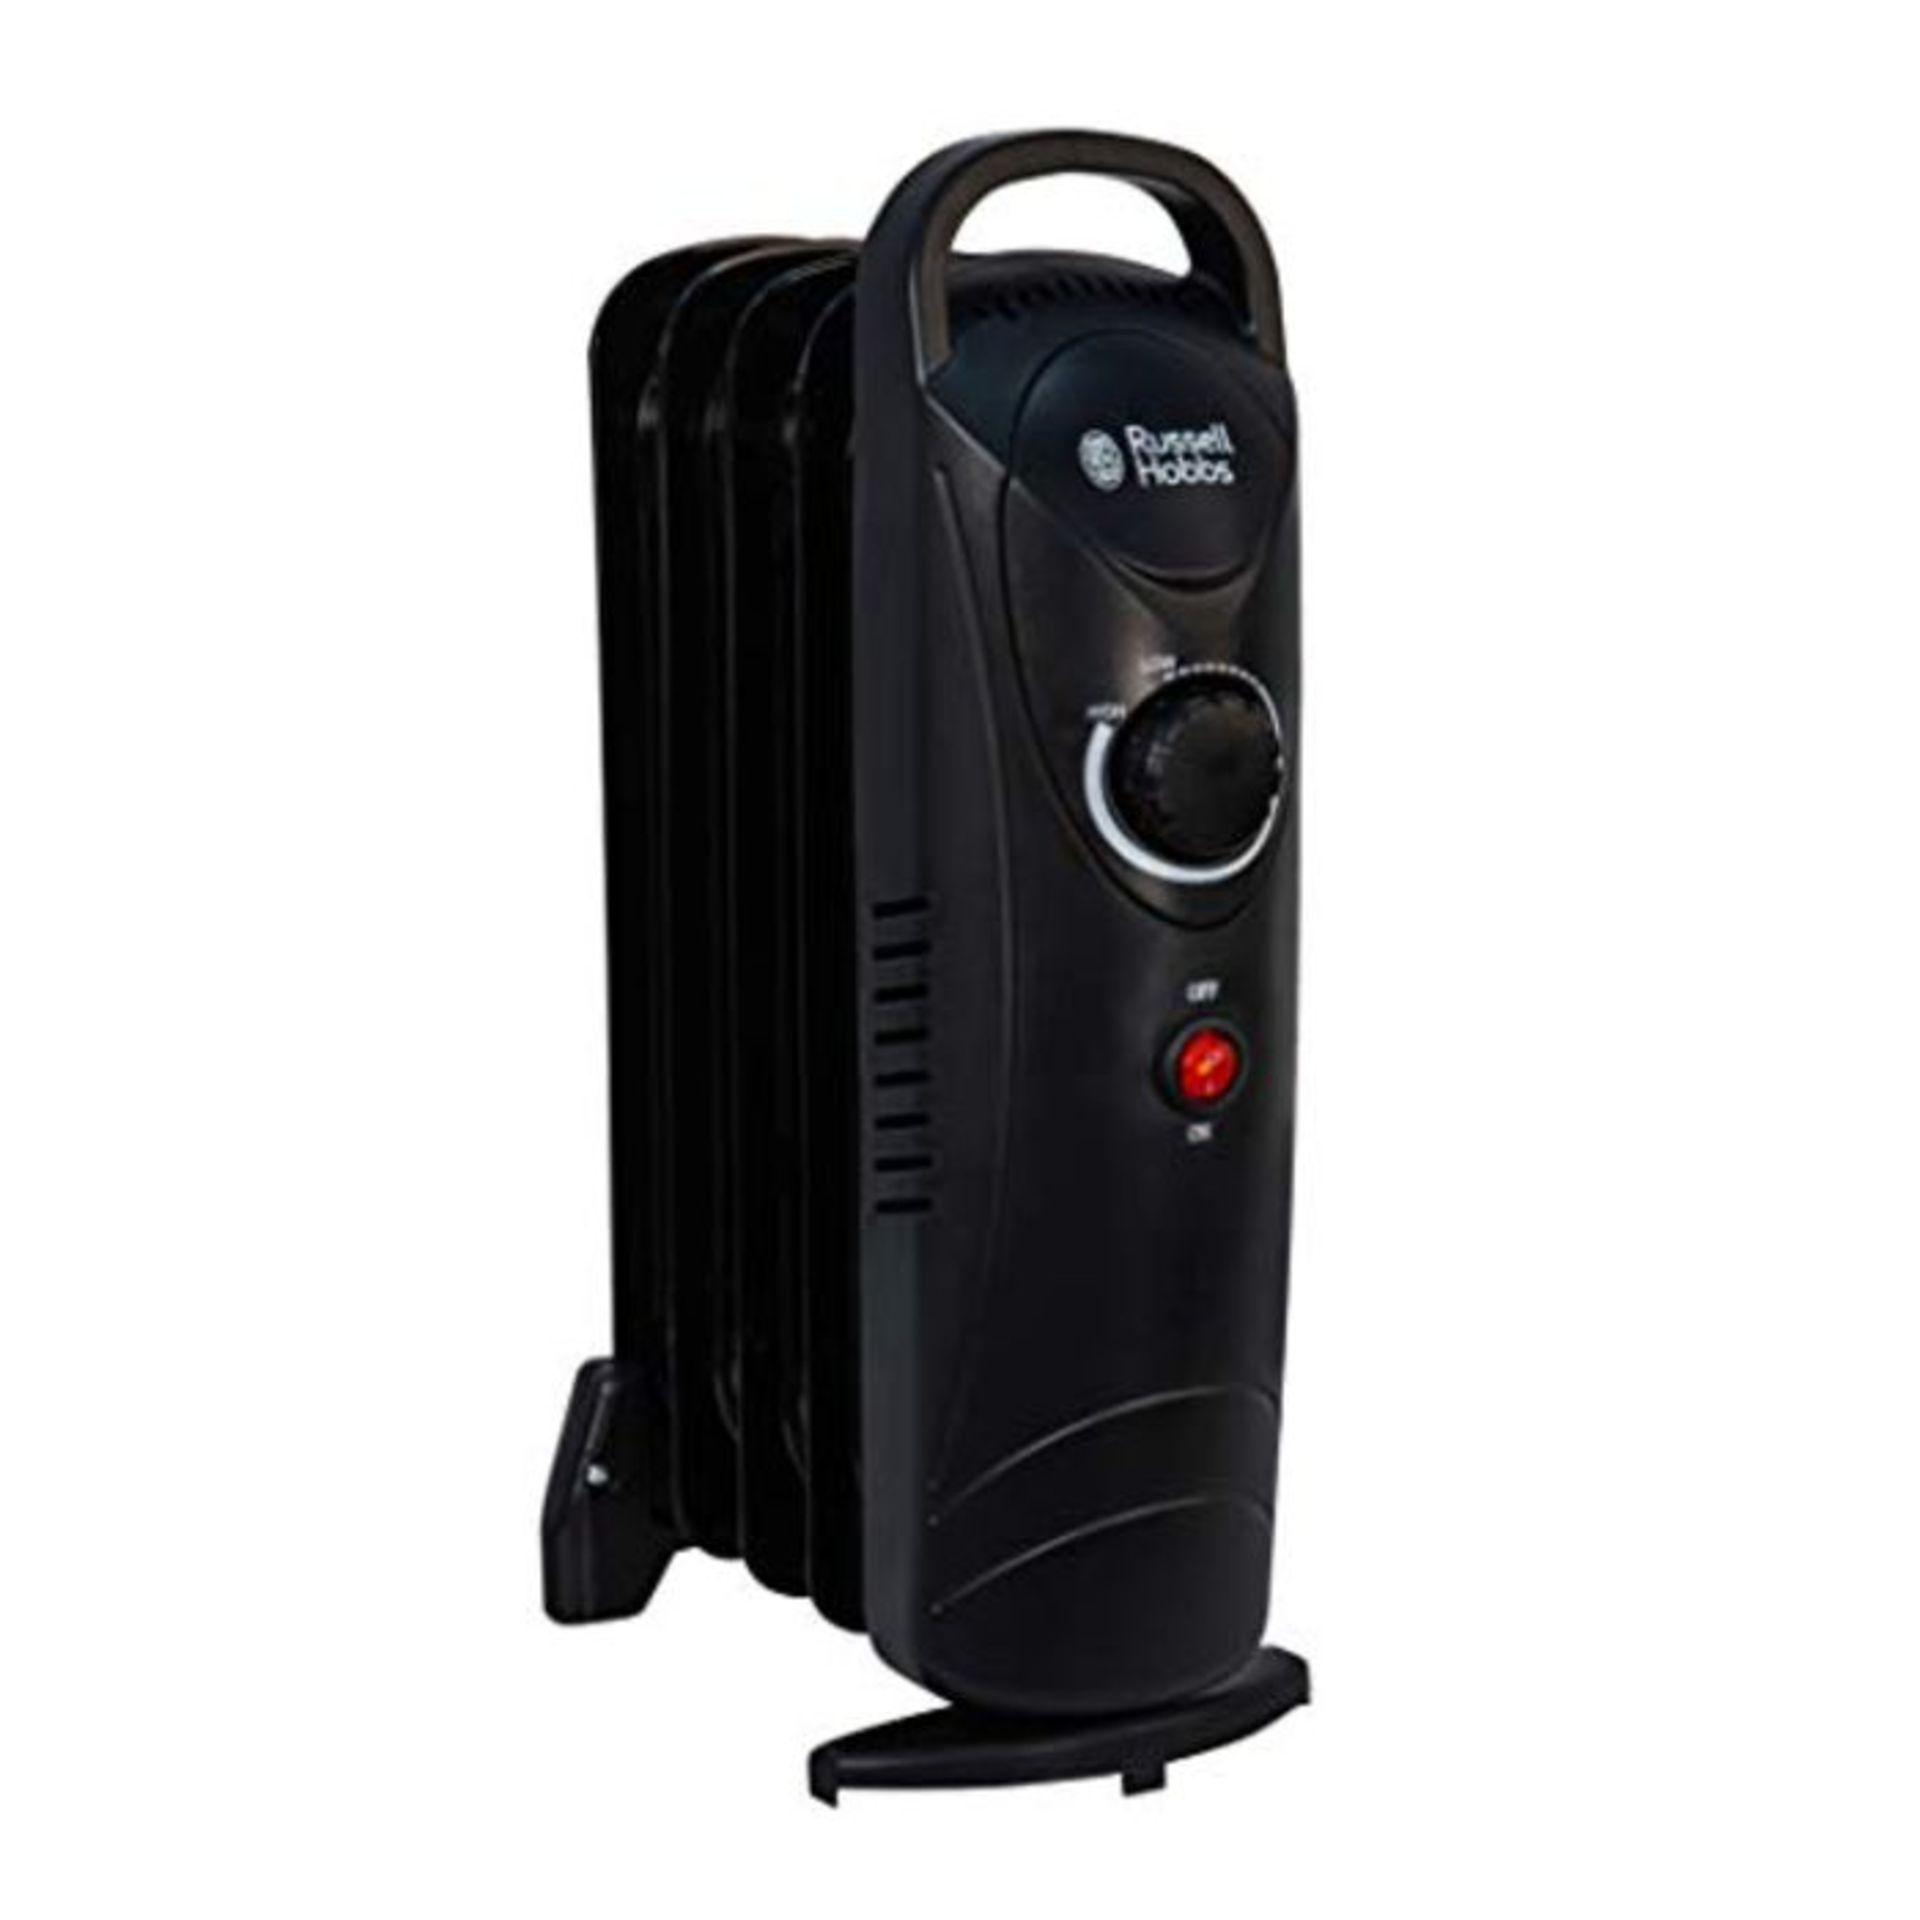 Russell Hobbs 650W Oil Filled Radiator, 5 Fin Portable Electric Heater - Black, Adjust - Image 4 of 6